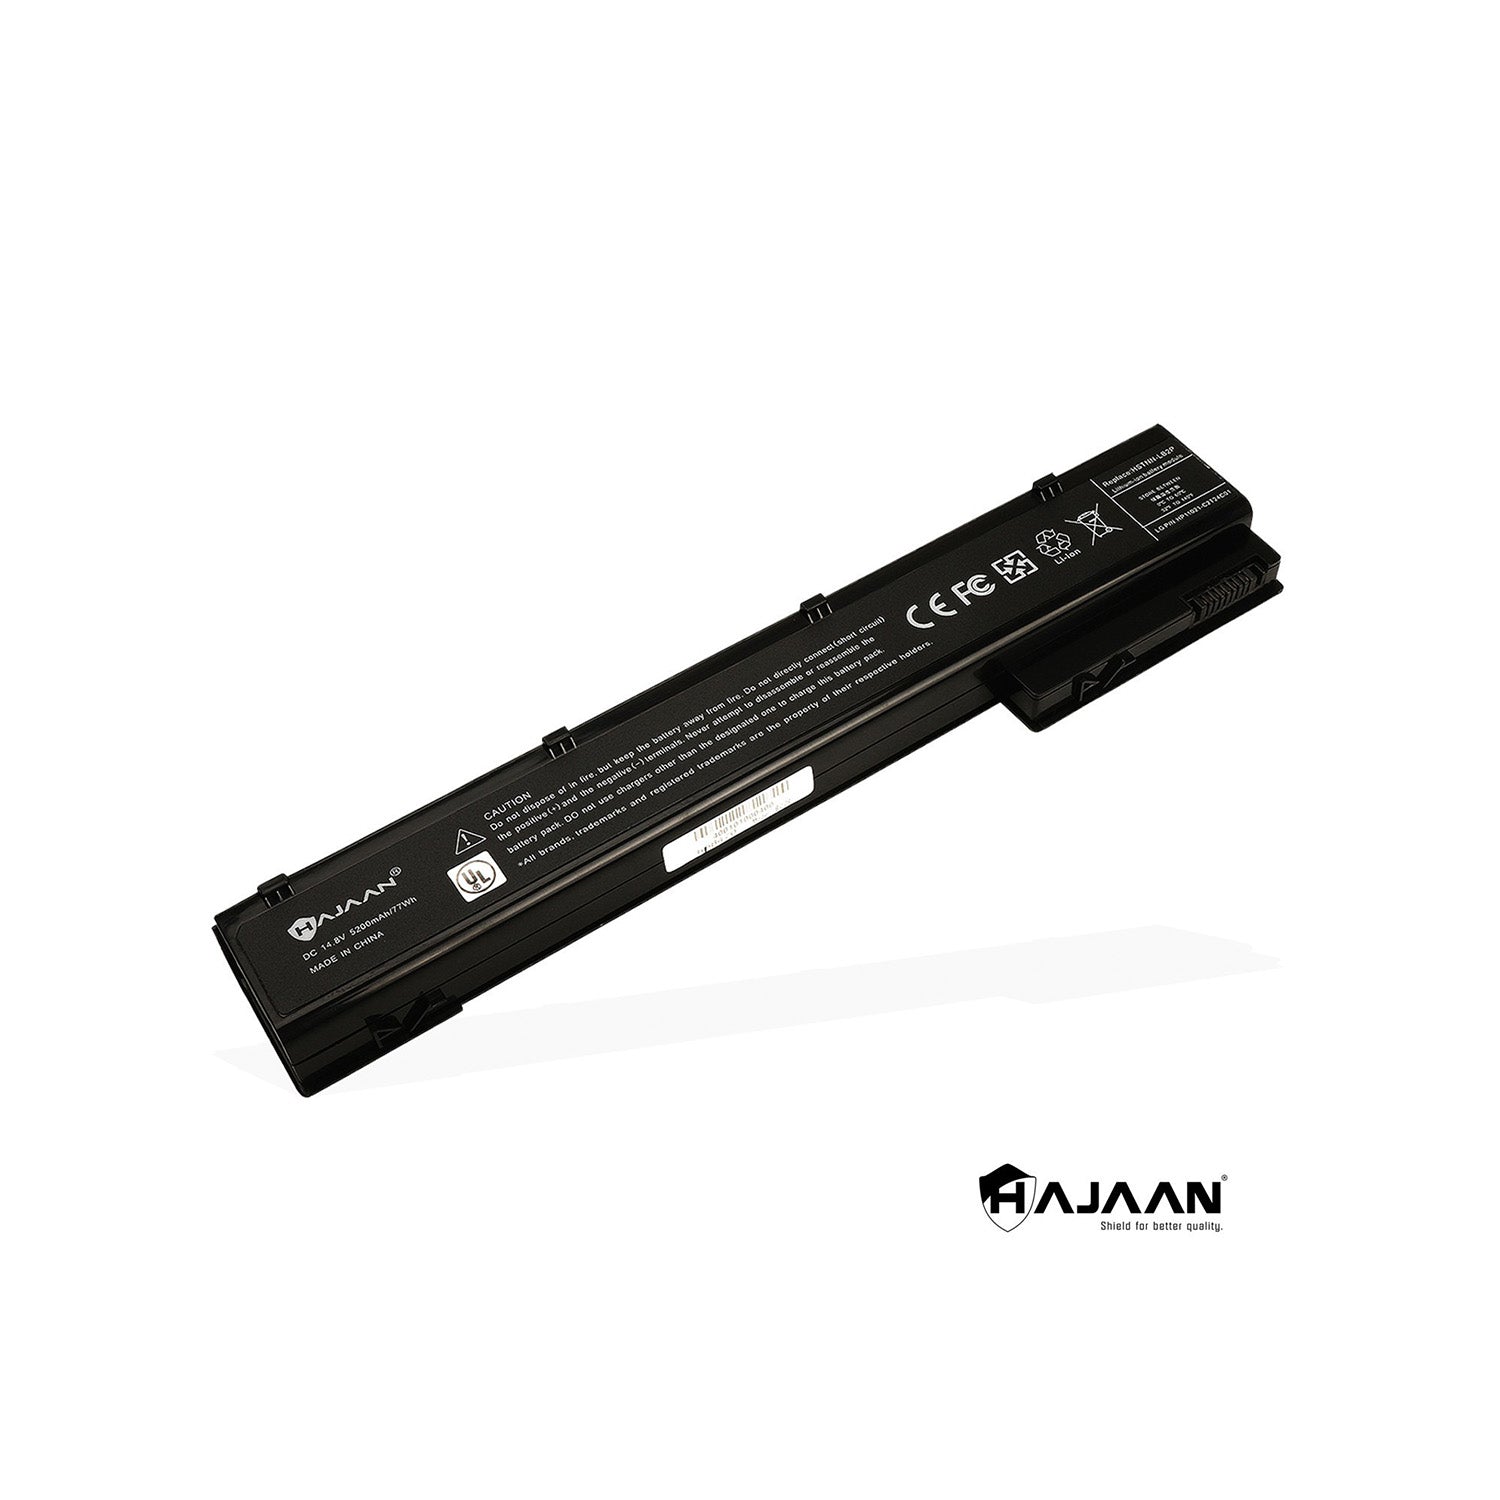 HAJAAN New Replacement Laptop Battery for HP Elitebook 8560w, 8570w HSTNN-LB2P (Li-ion, 5200mAh/77Wh, 8-Cells,14.8V), 1 Year Warranty